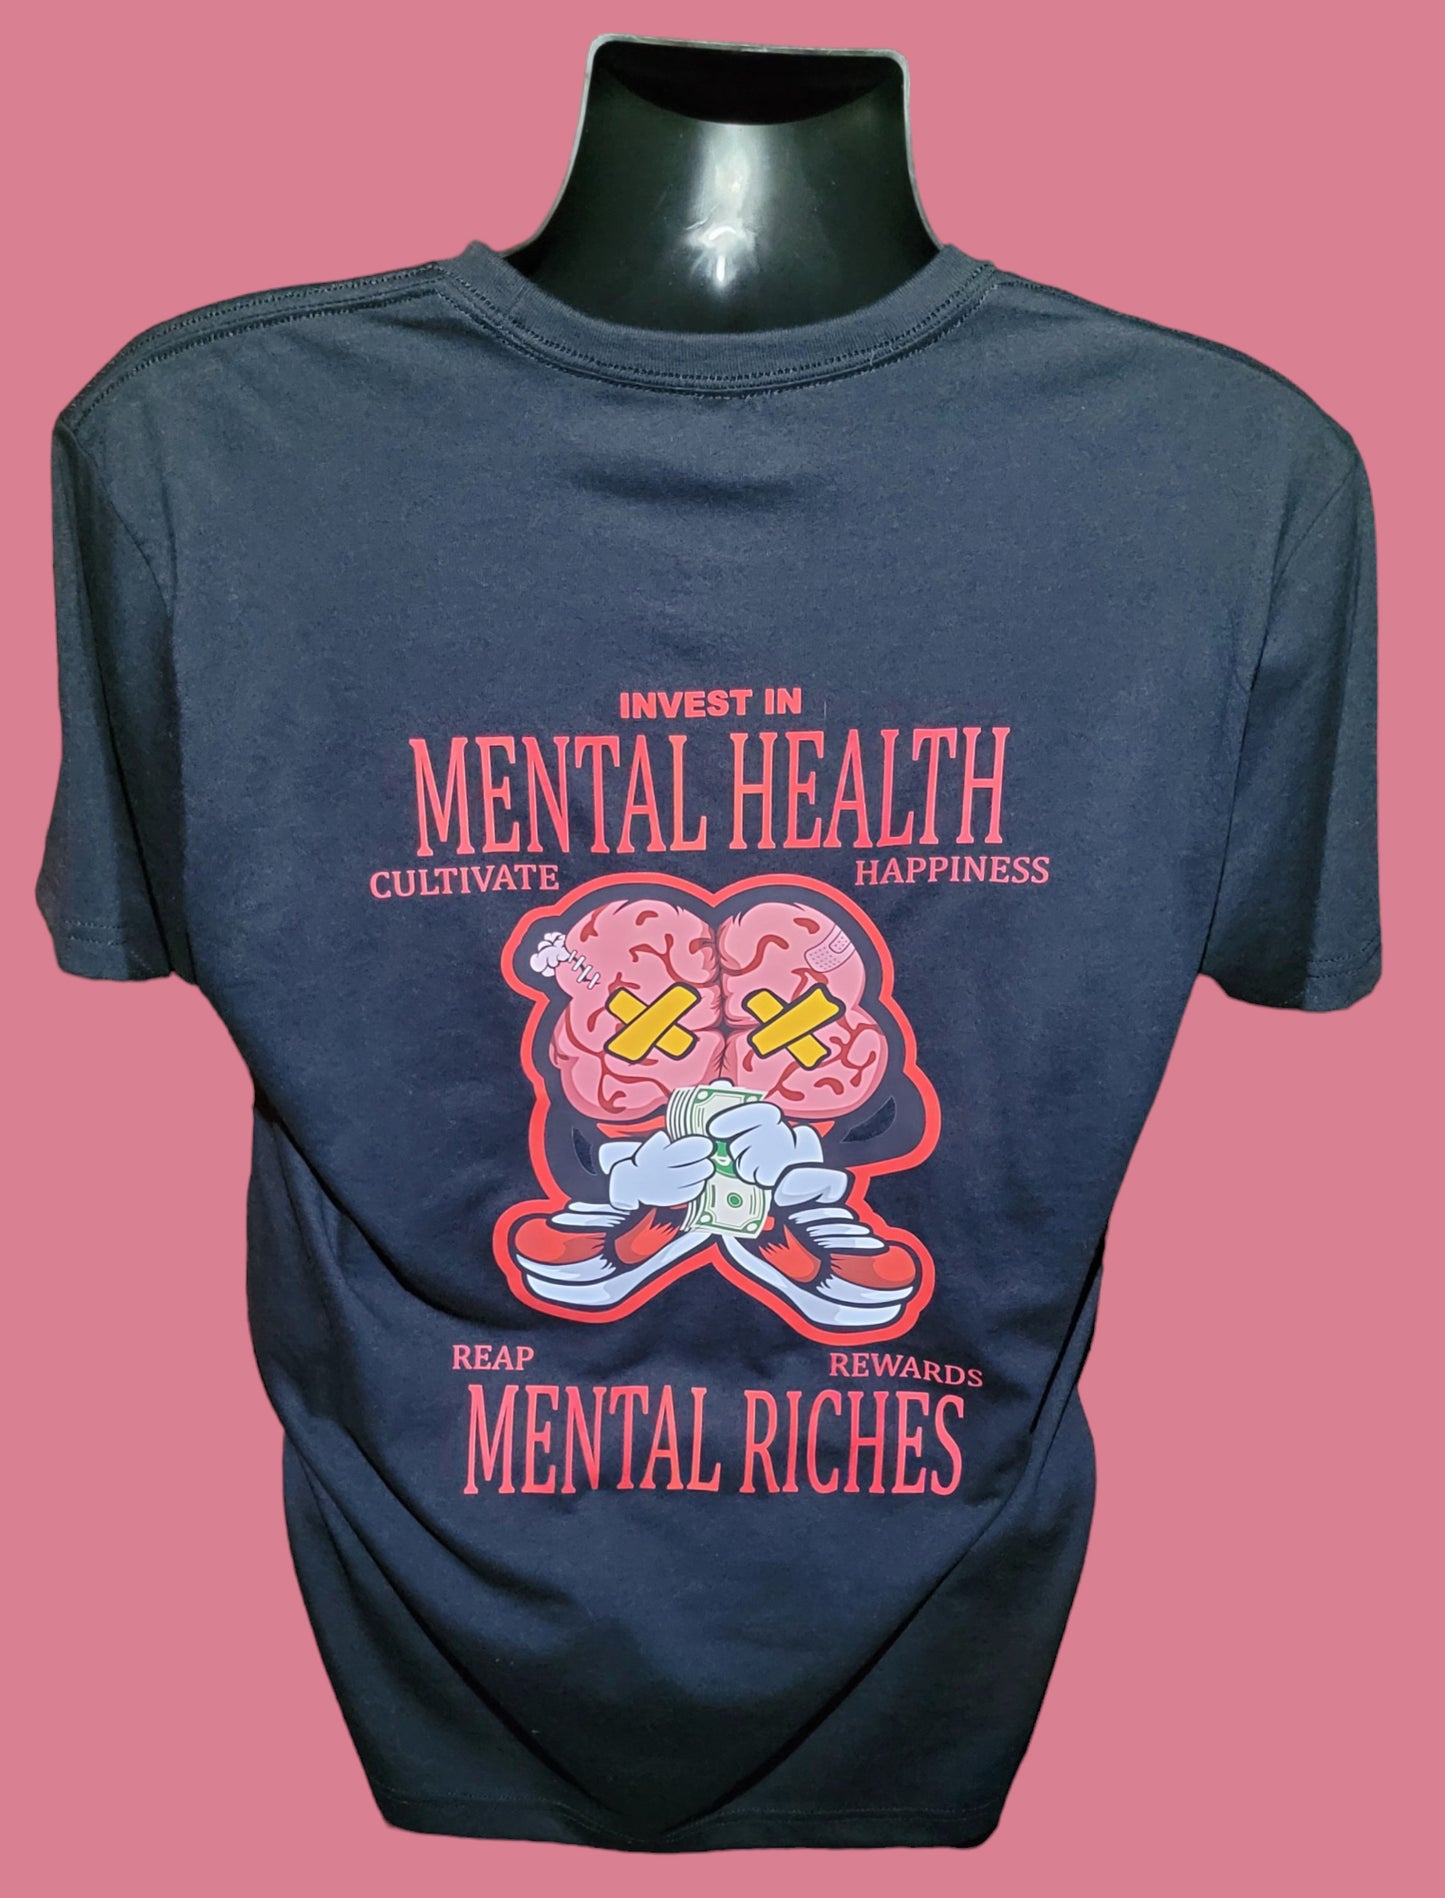 Invest in Mental Health Reap Mental Riches T-Shirt